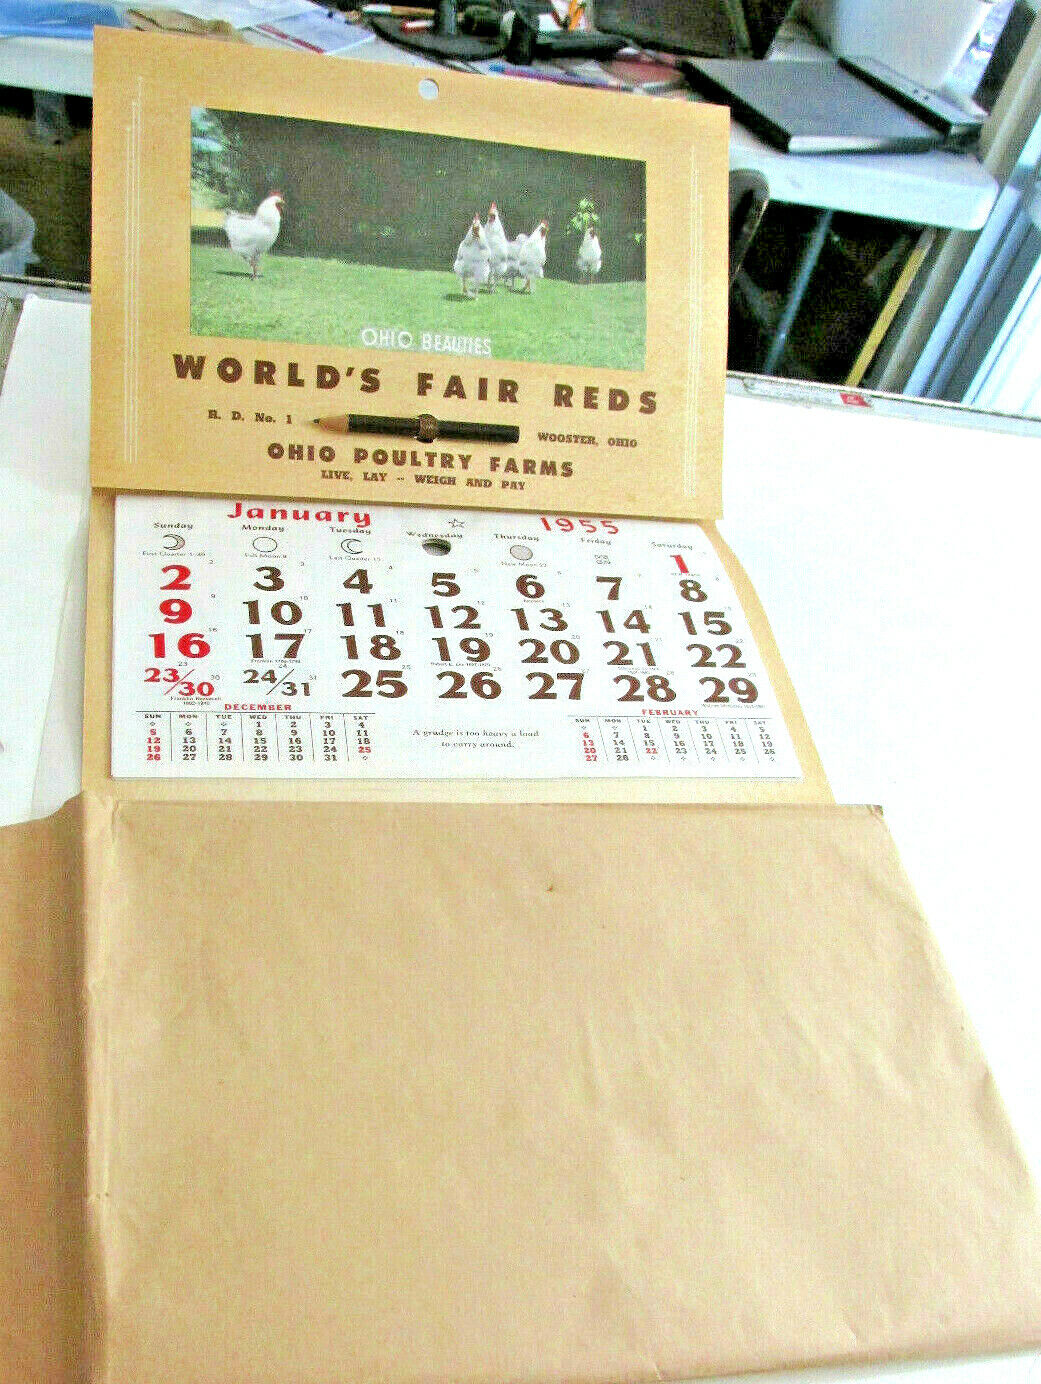 1955 WOOSTER OHIO Adv Calendar Ohio Poultry Farms World\'s Fair Reds Chickens Hen